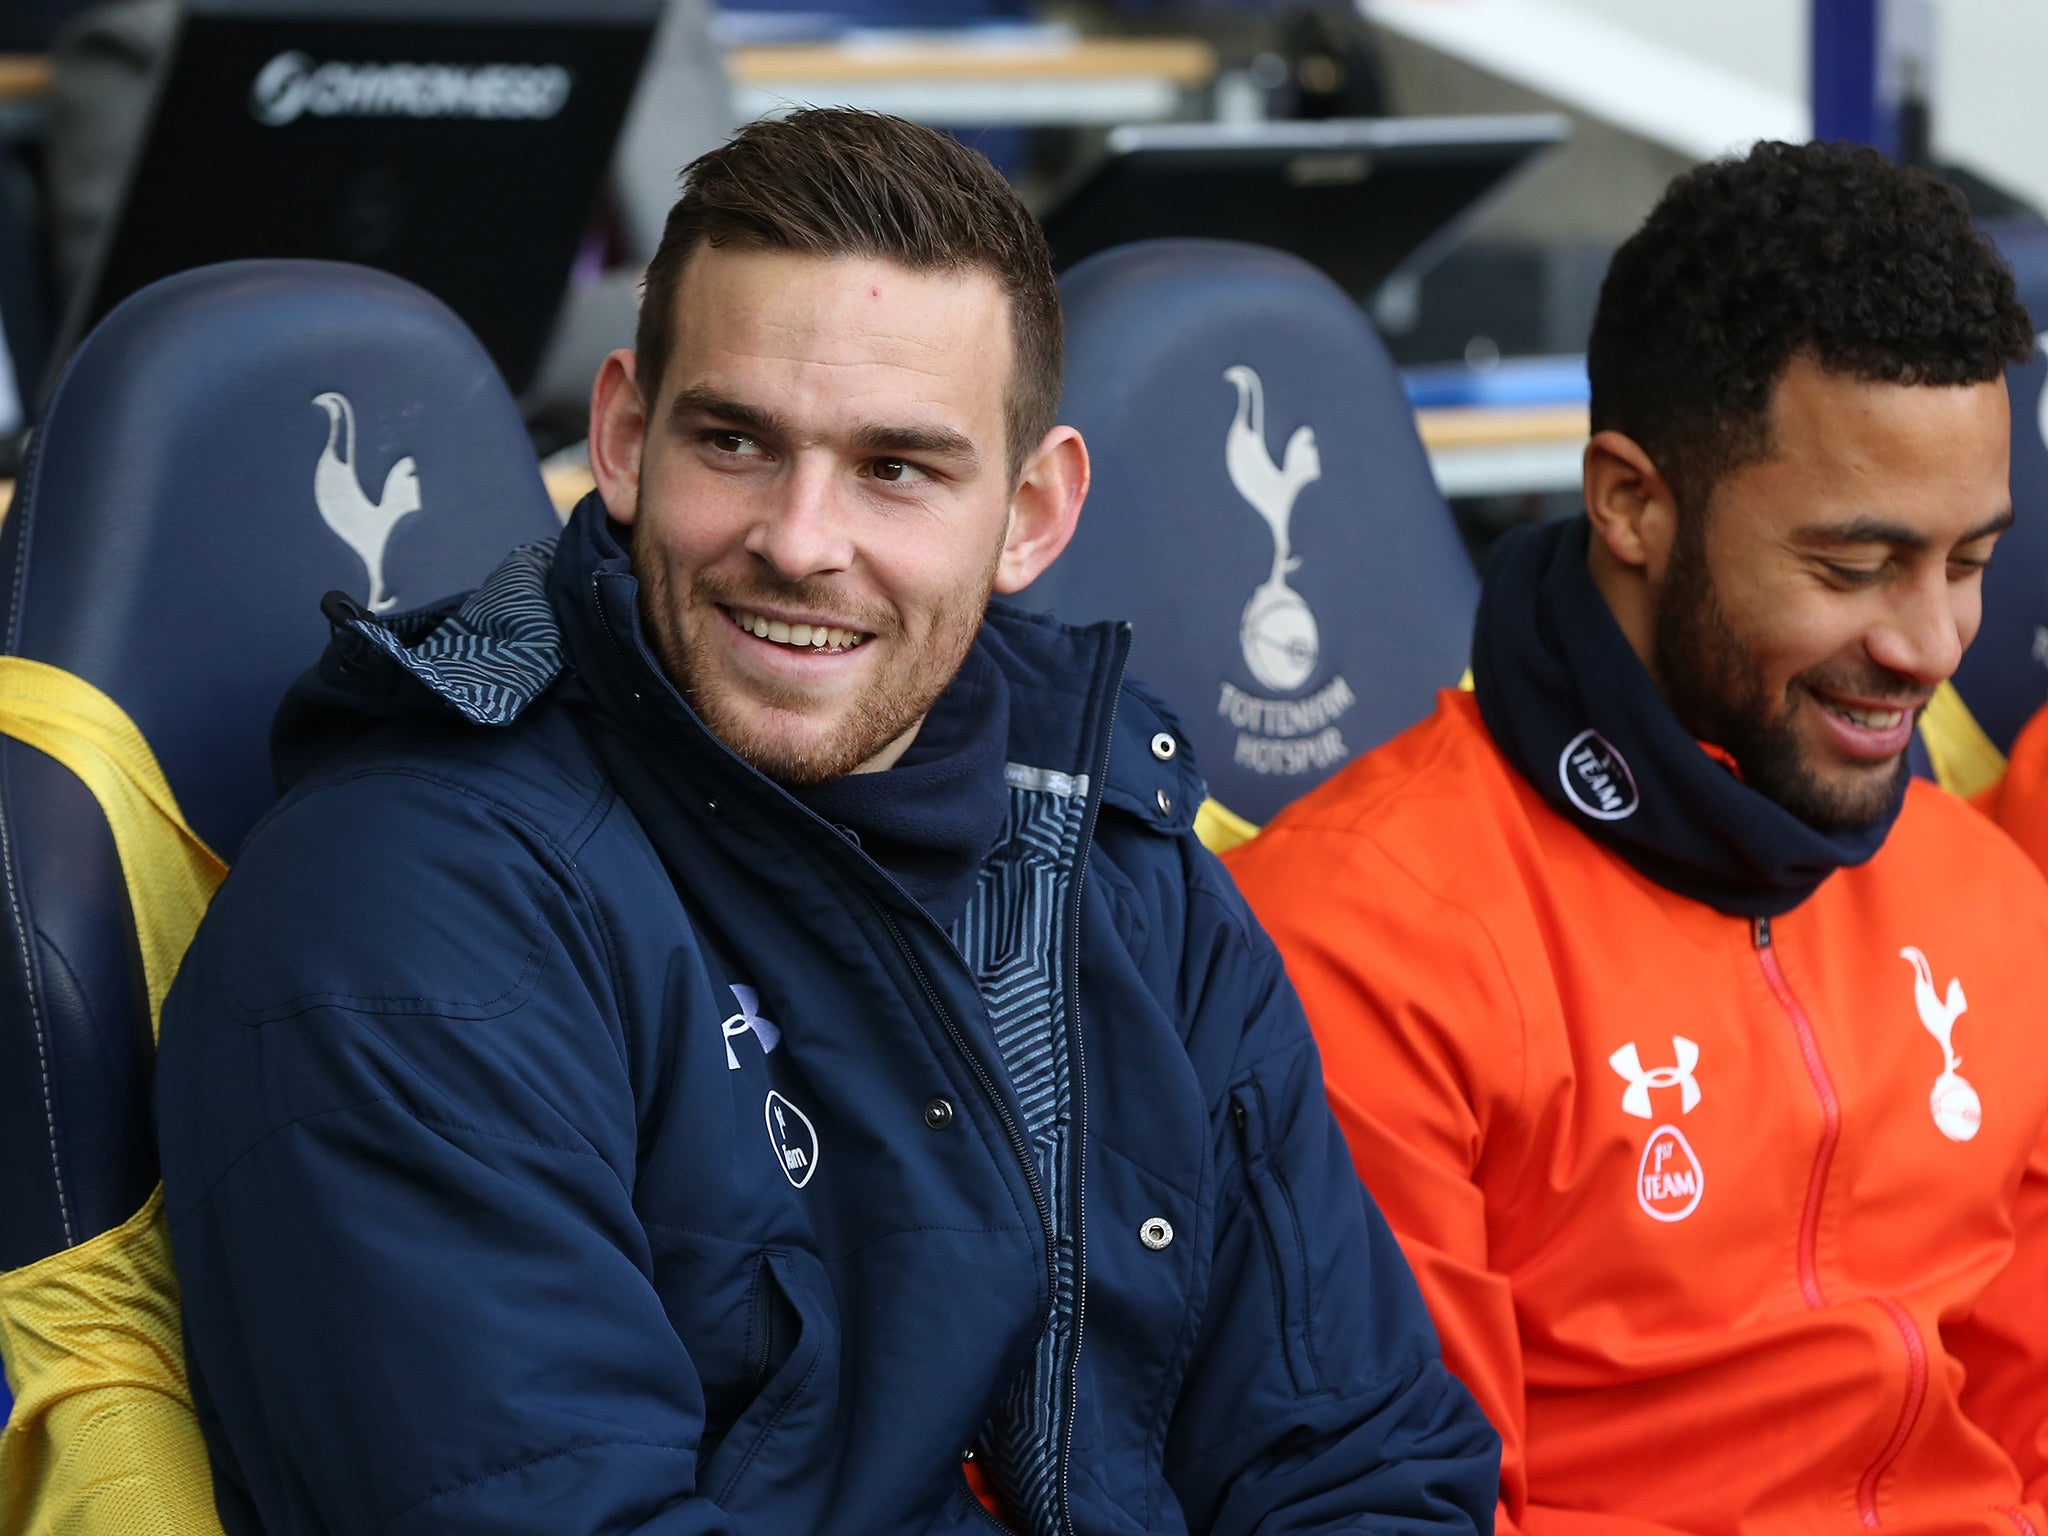 Vincent Janssen is not likely to feature in Tottenham's FA Cup fifth round tie at Fulham